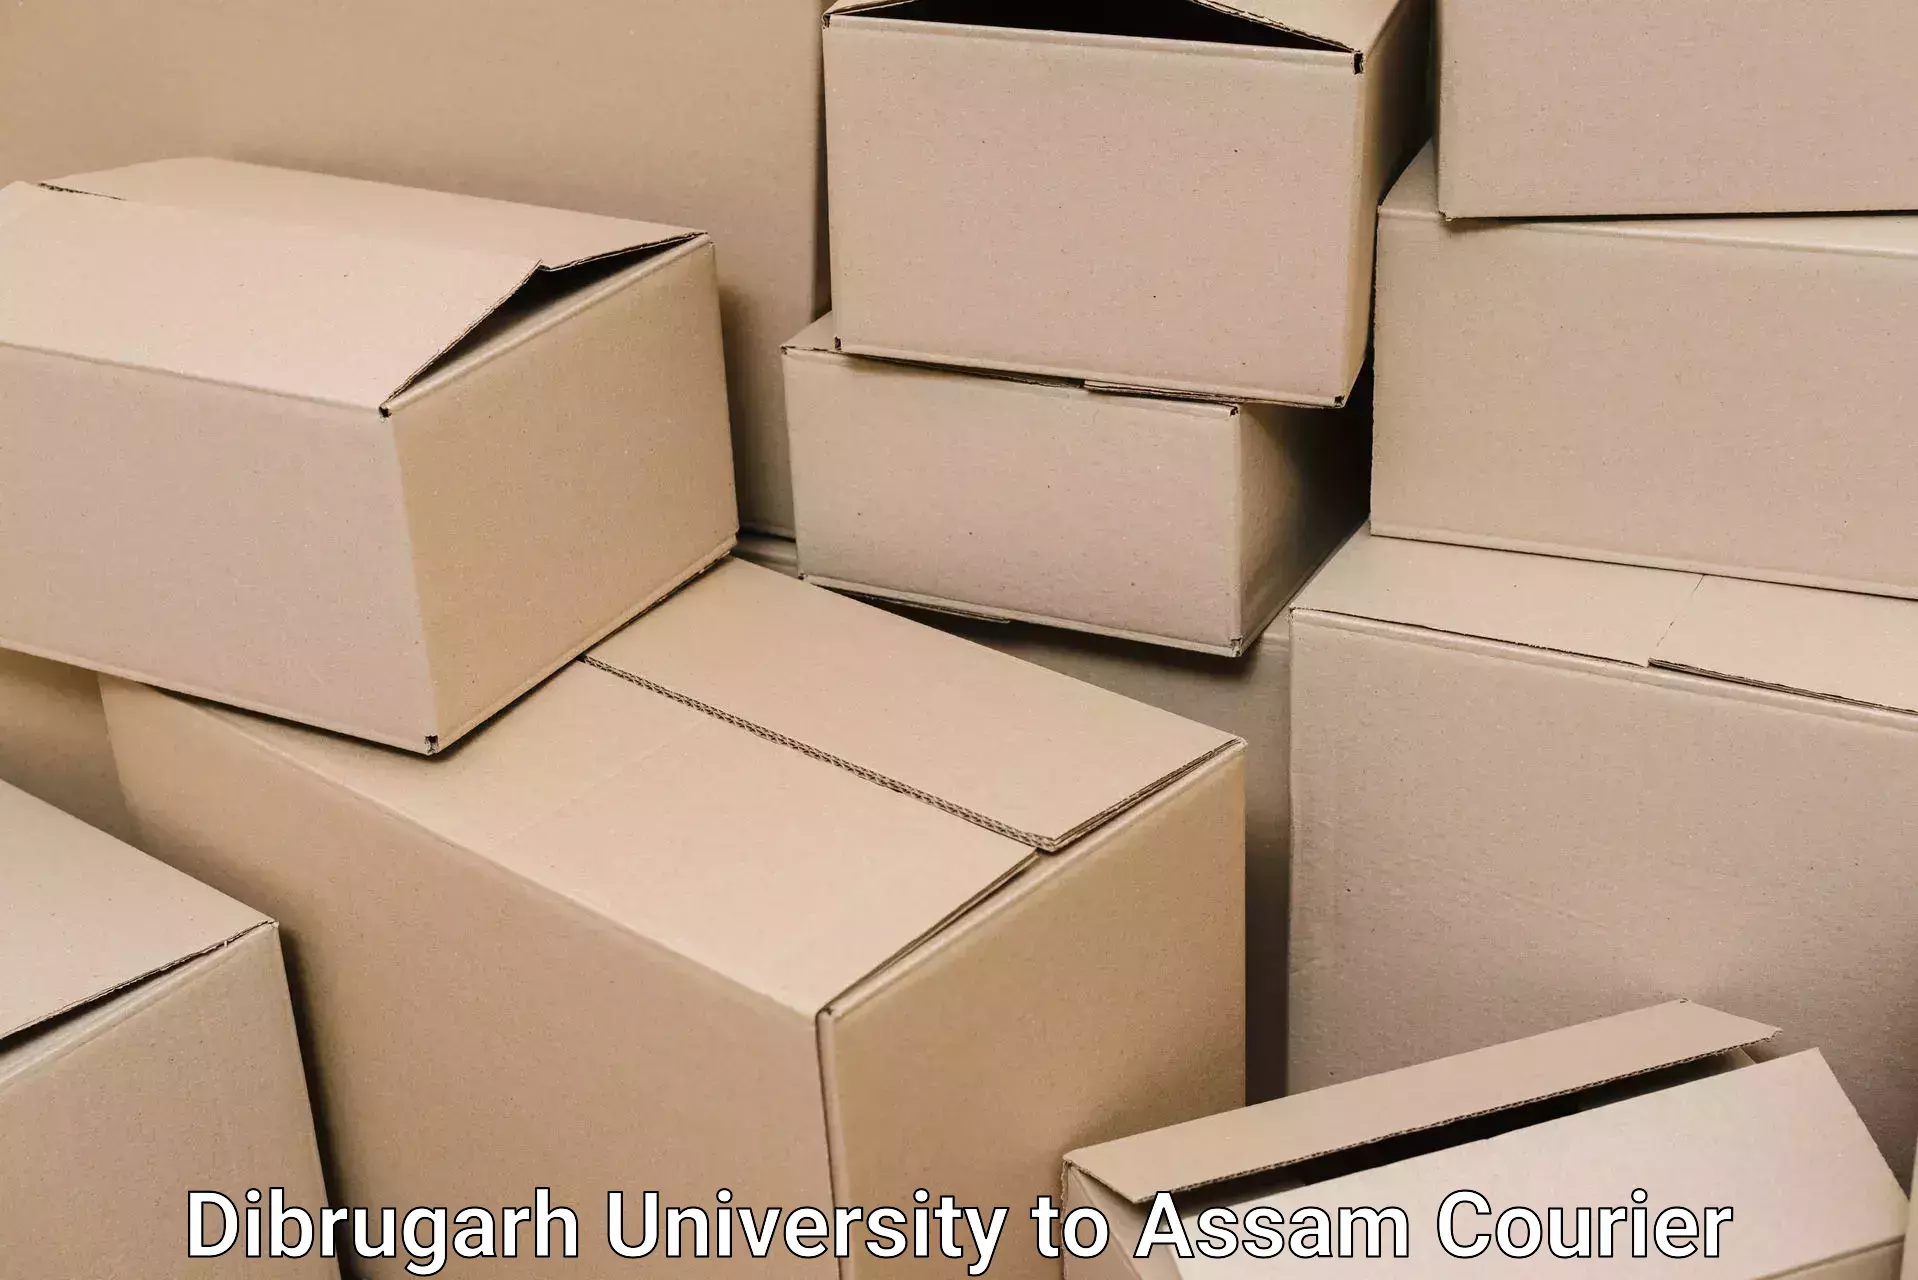 Packing and moving services Dibrugarh University to Golaghat